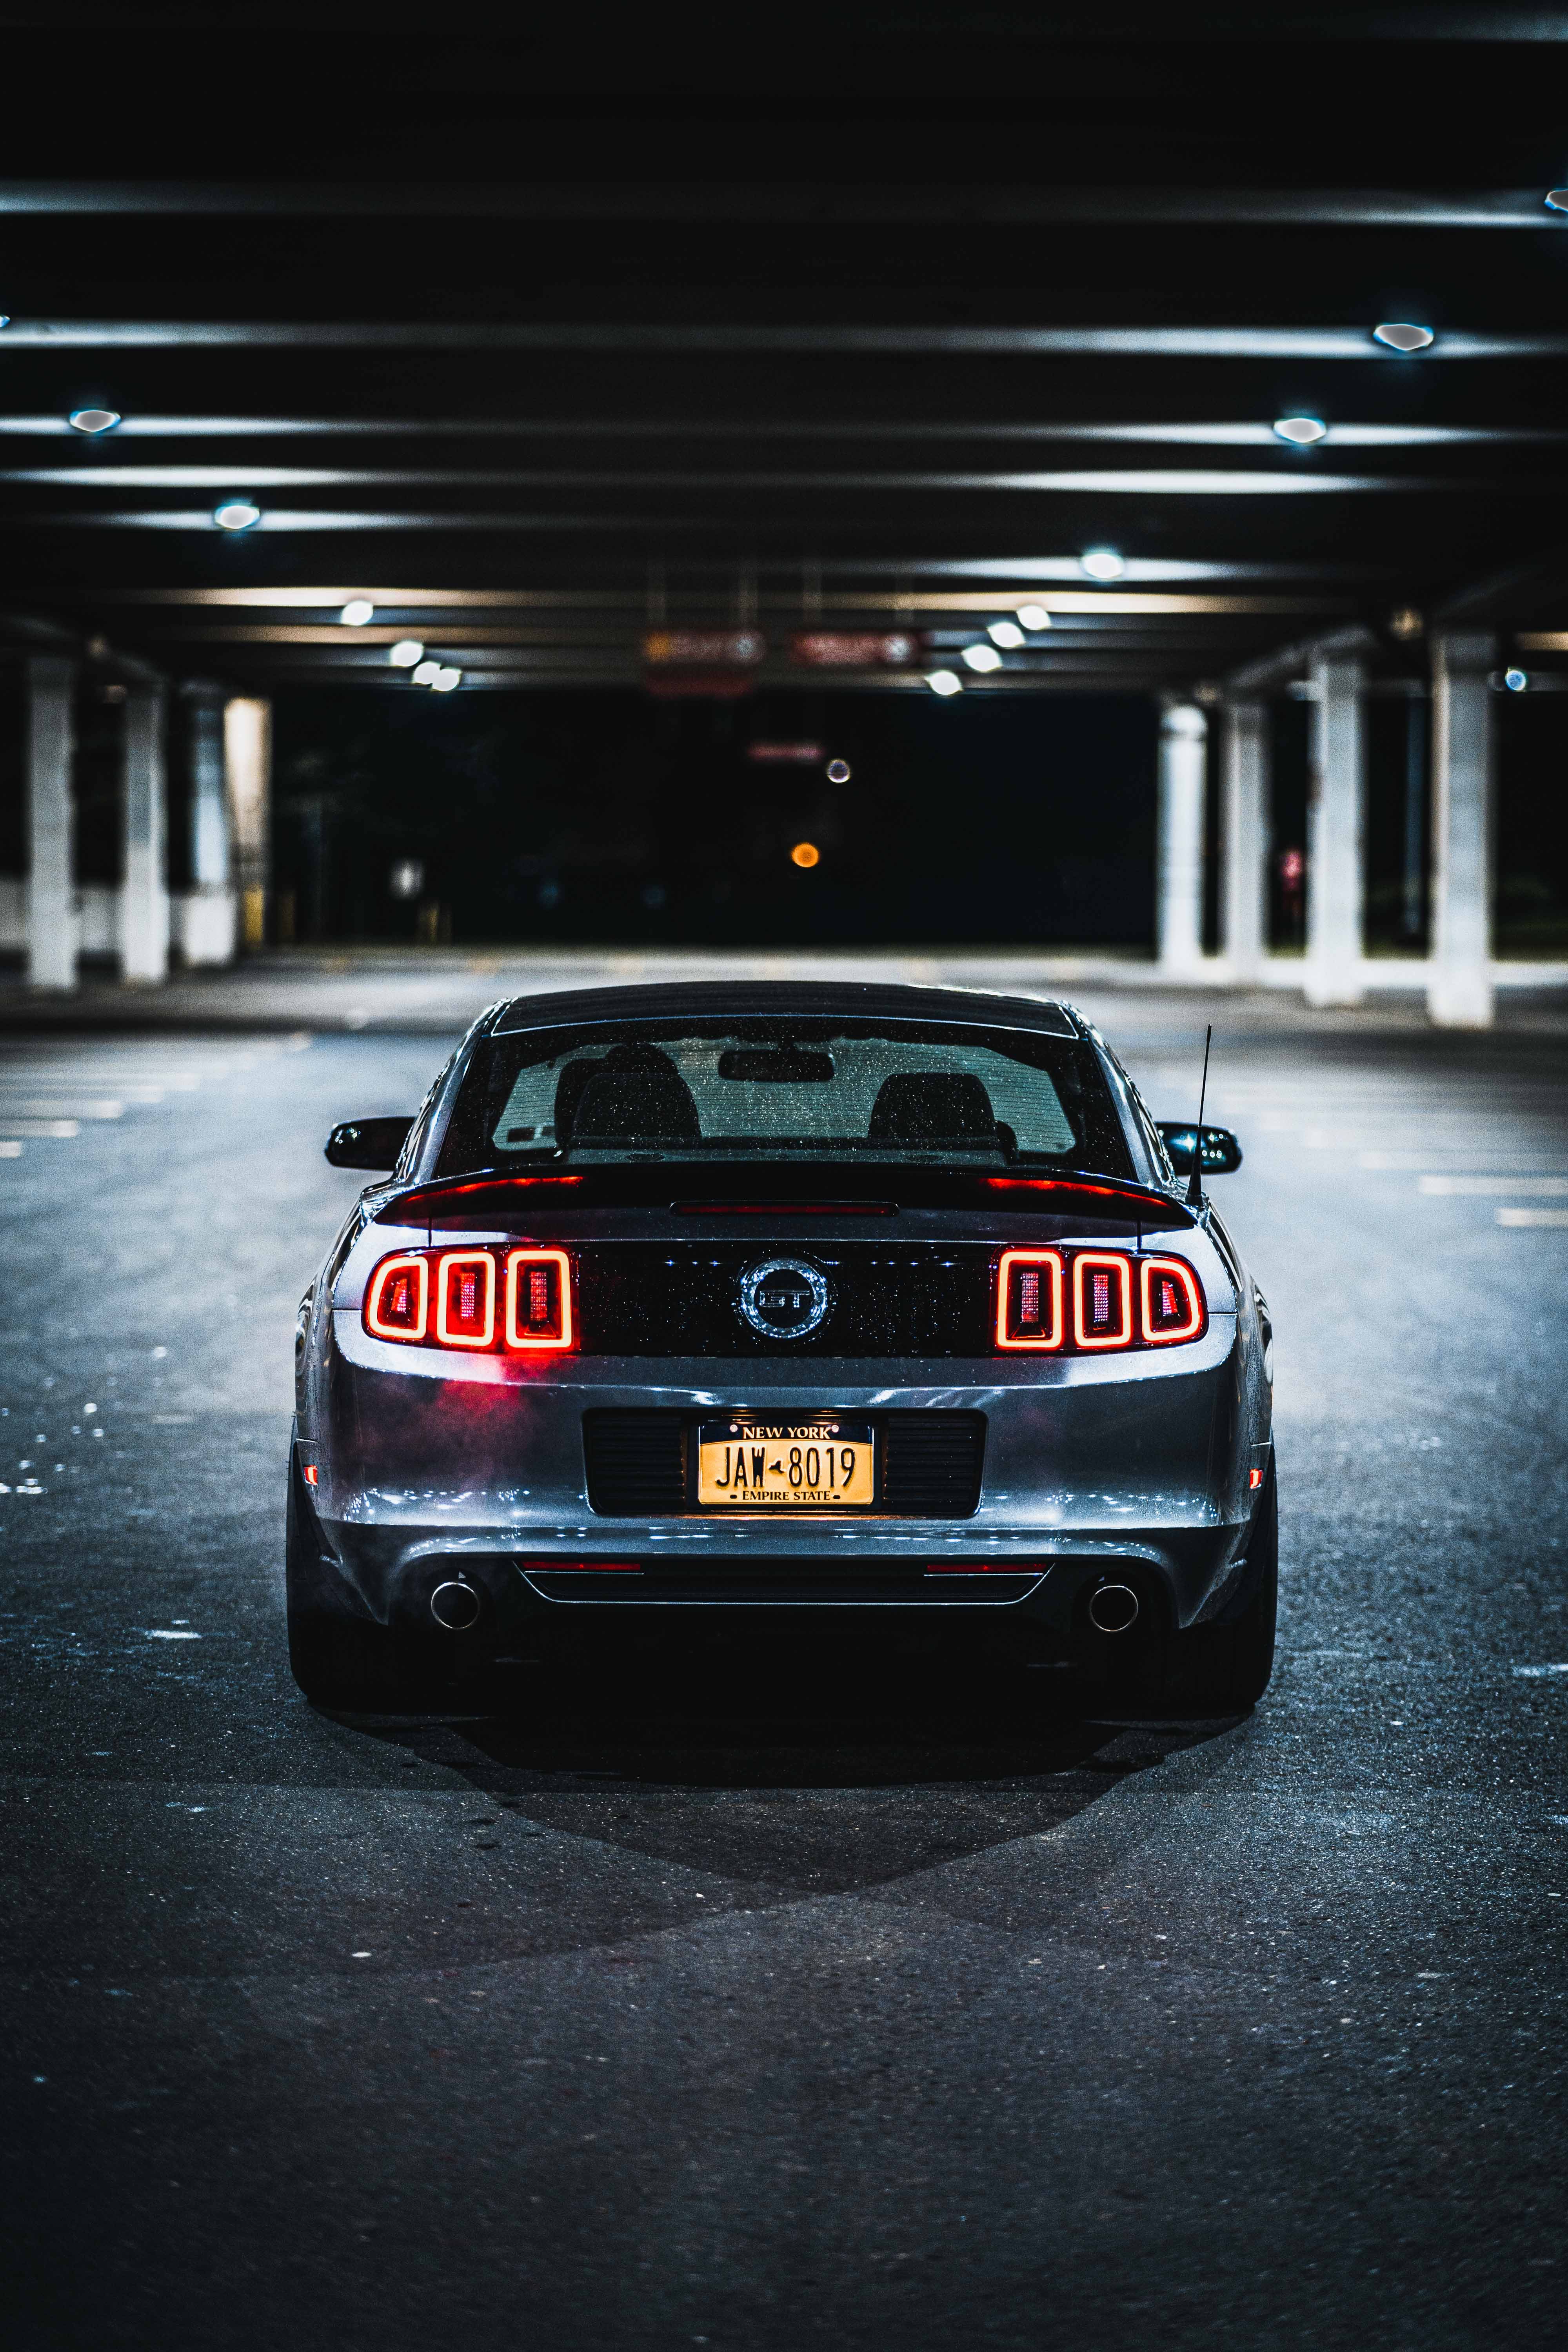 lights, ford mustang, ford mustang gt, cars, back view, rear view, headlights